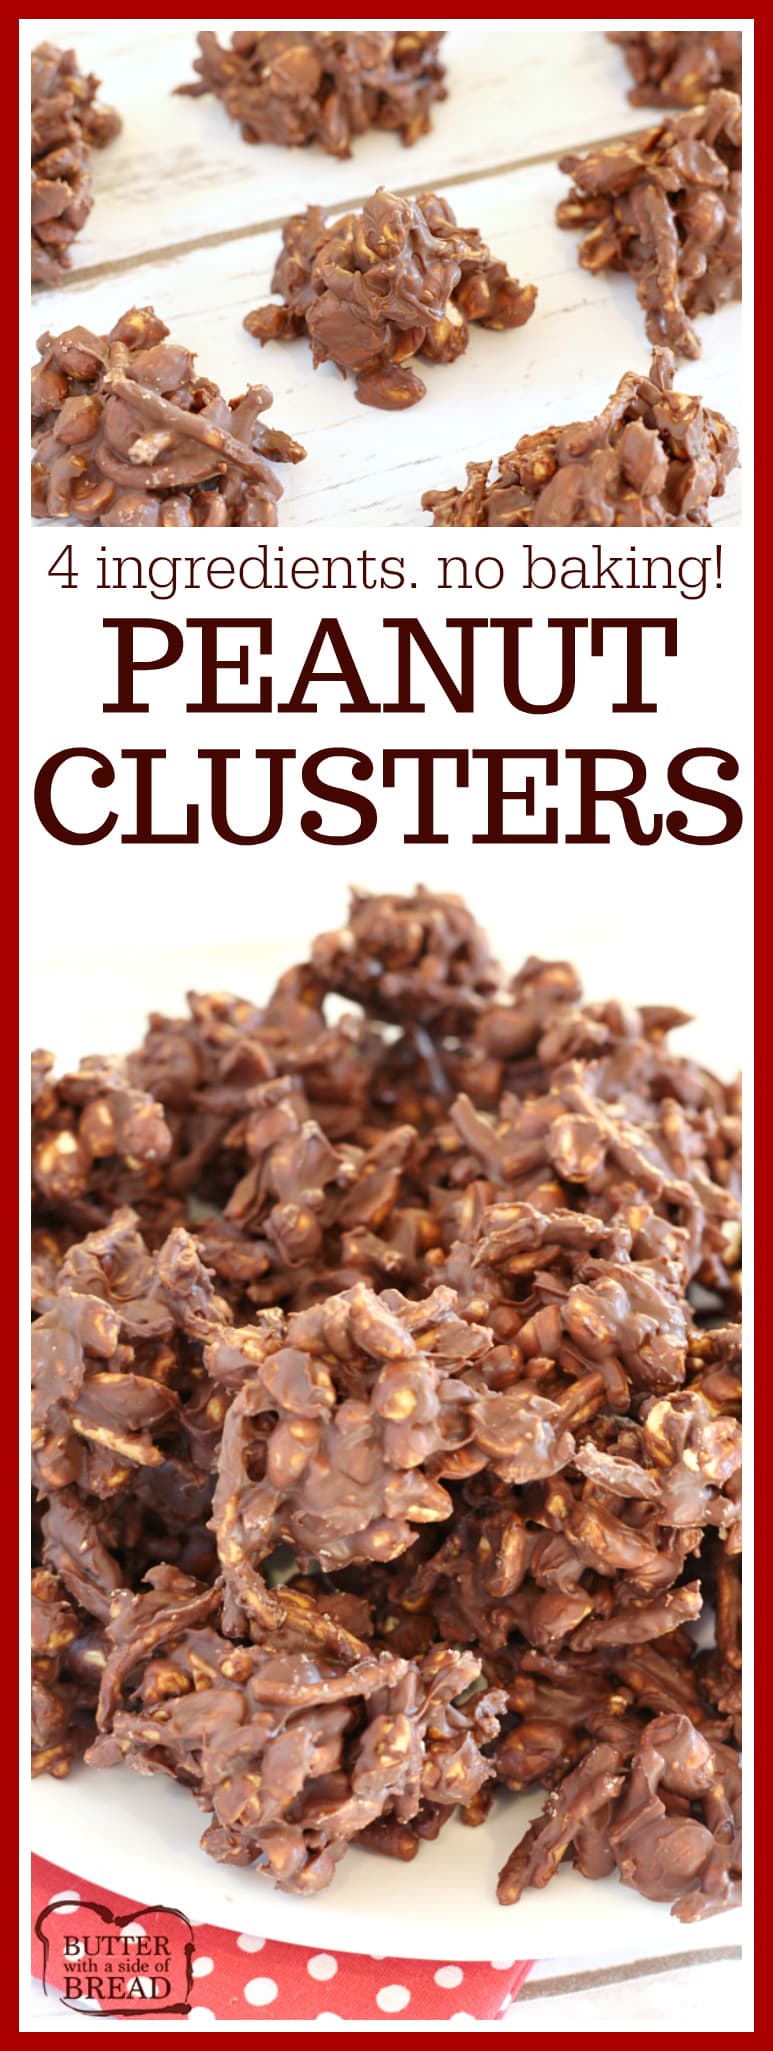 Peanut Clusters are the easiest no-bake treats to make with just four ingredients - chocolate chips, butterscotch chips, peanuts and crunchy chow mein noodles!